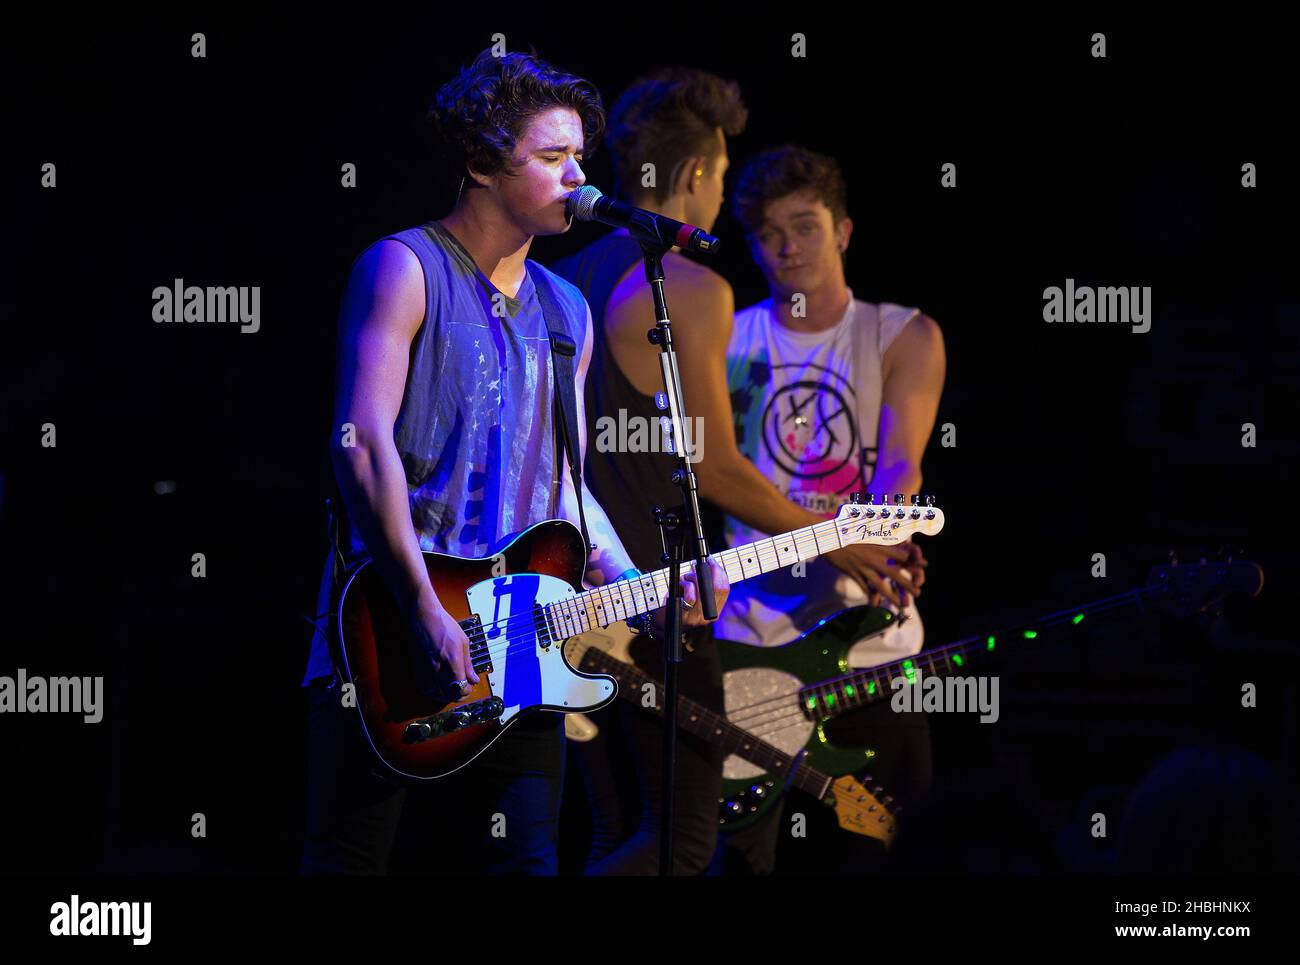 Bradley Simpson,James McVey and Tristan Evans of The Vamps perform at the Event Hammersmith Apollo in London. Stock Photo